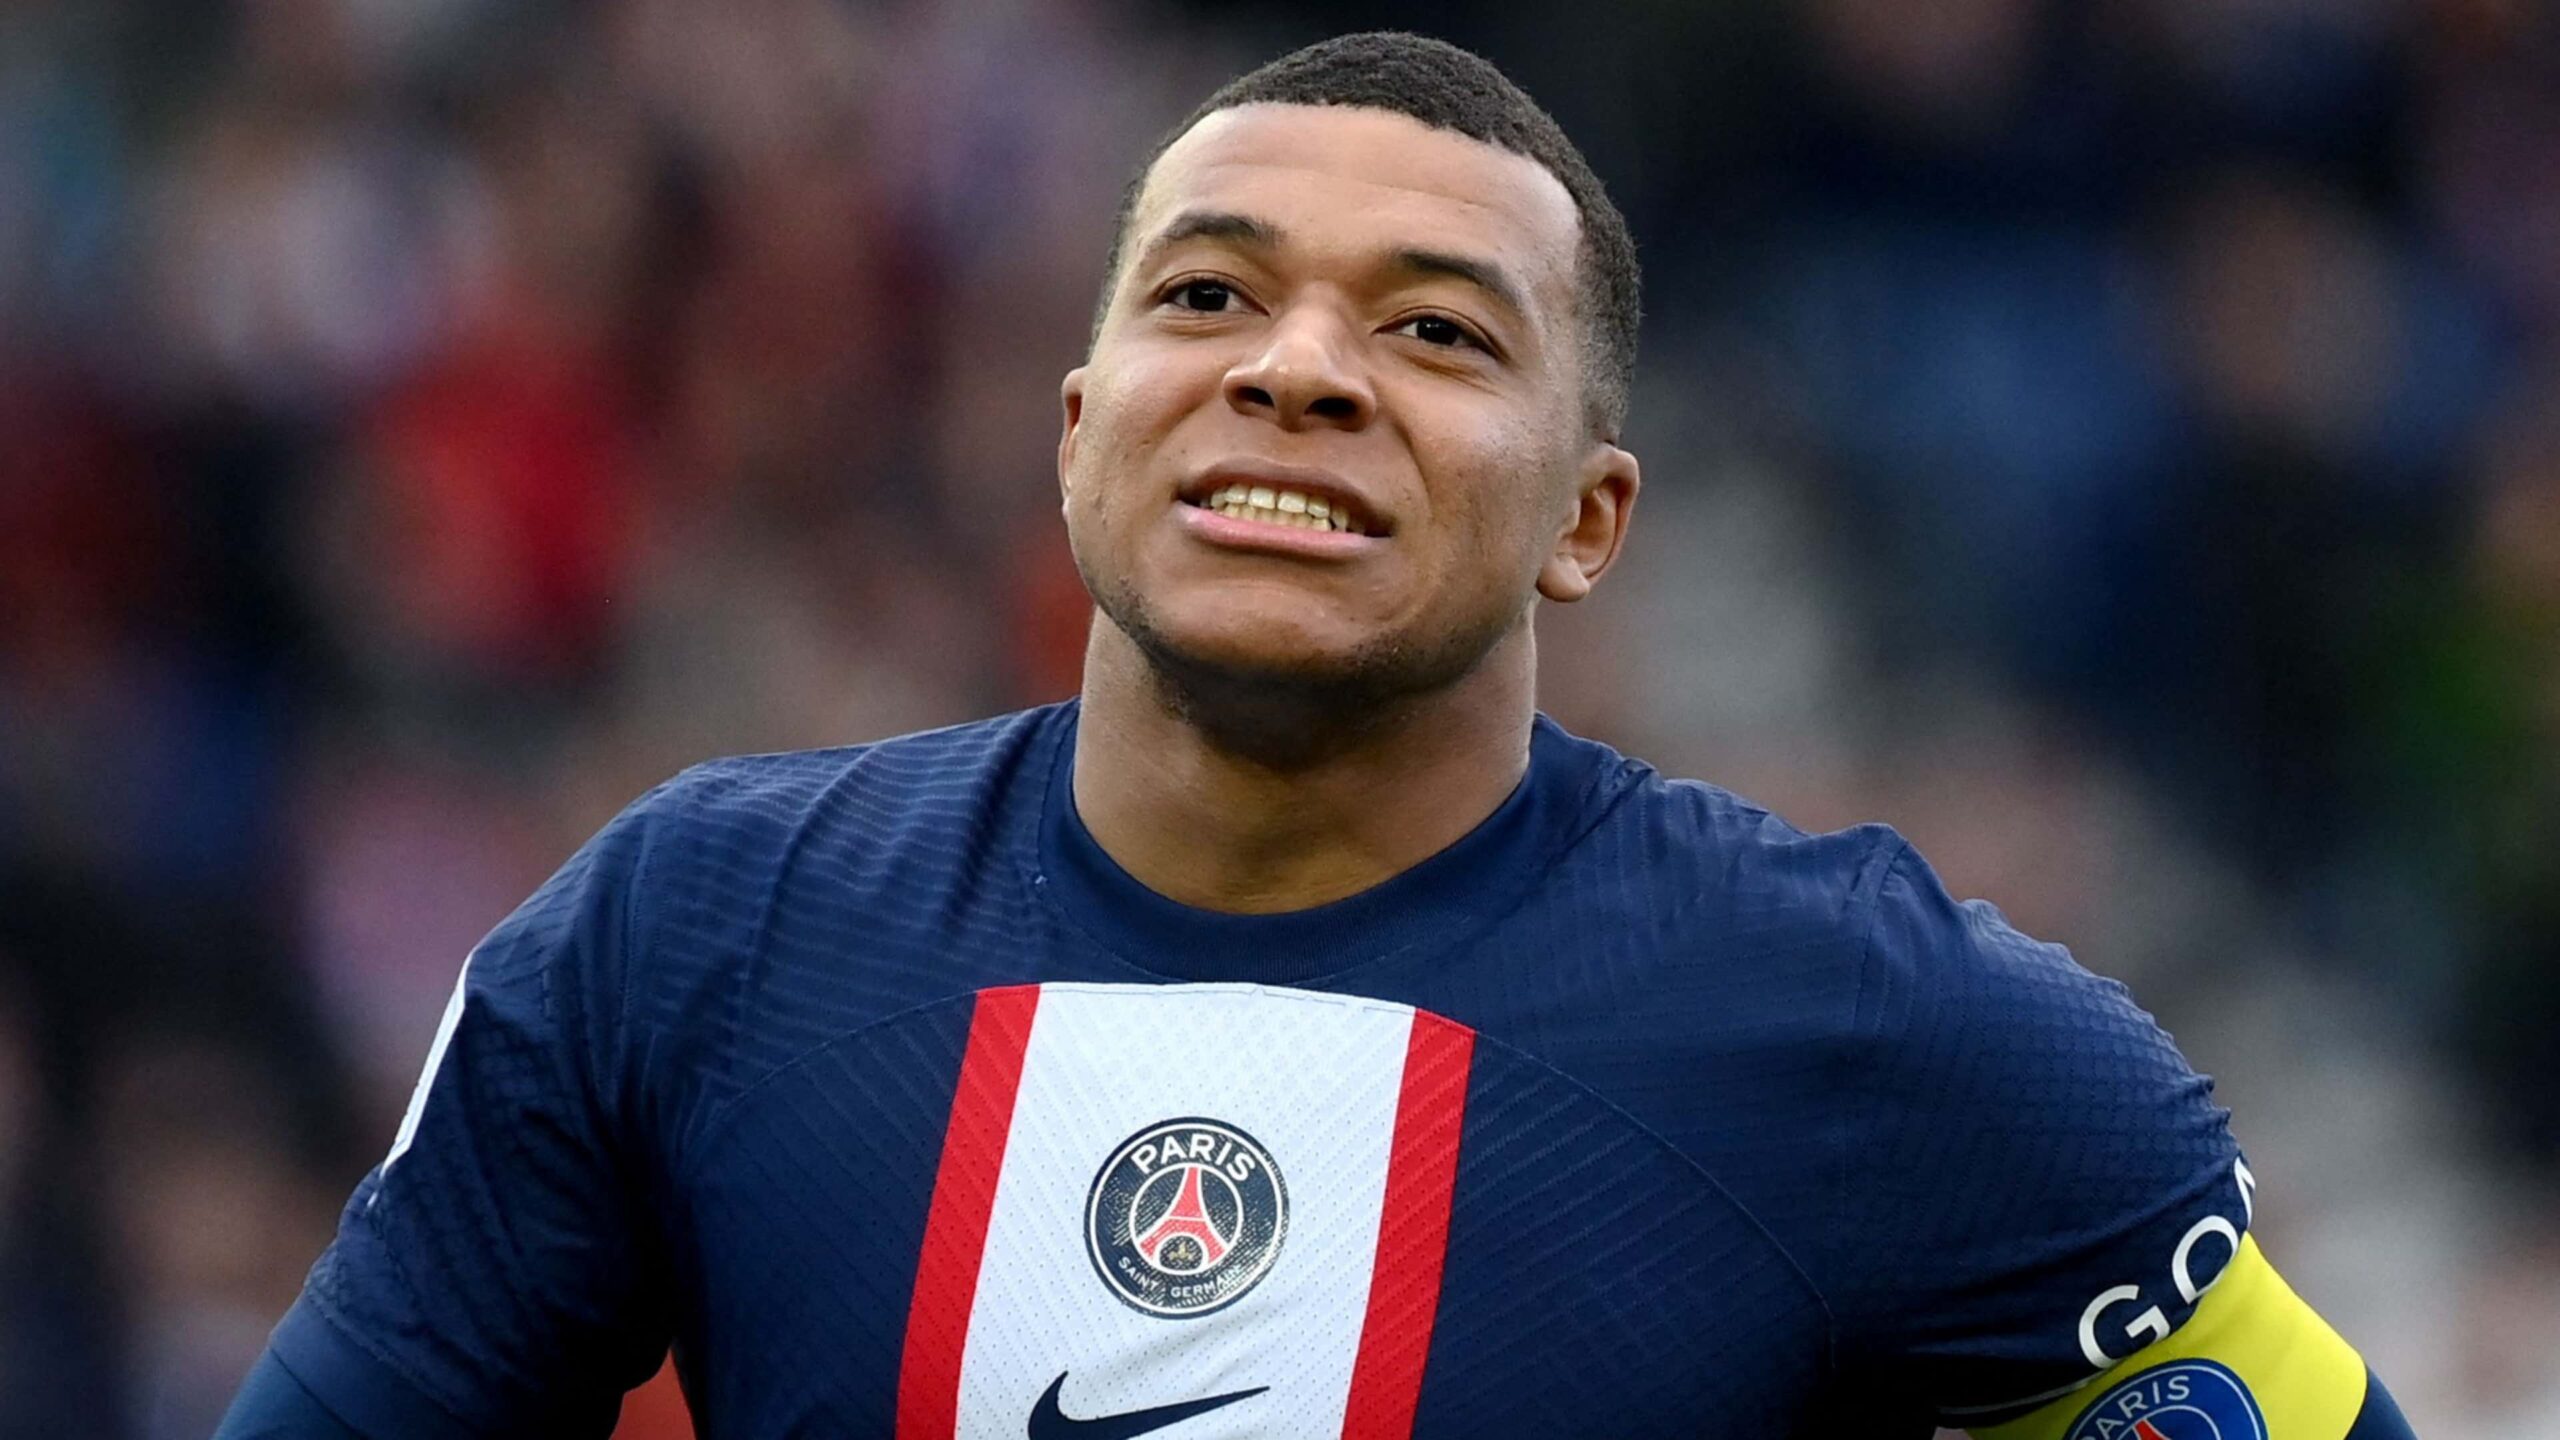 Kylian Mbappe wage and bonus demands as Liverpool touted yet again